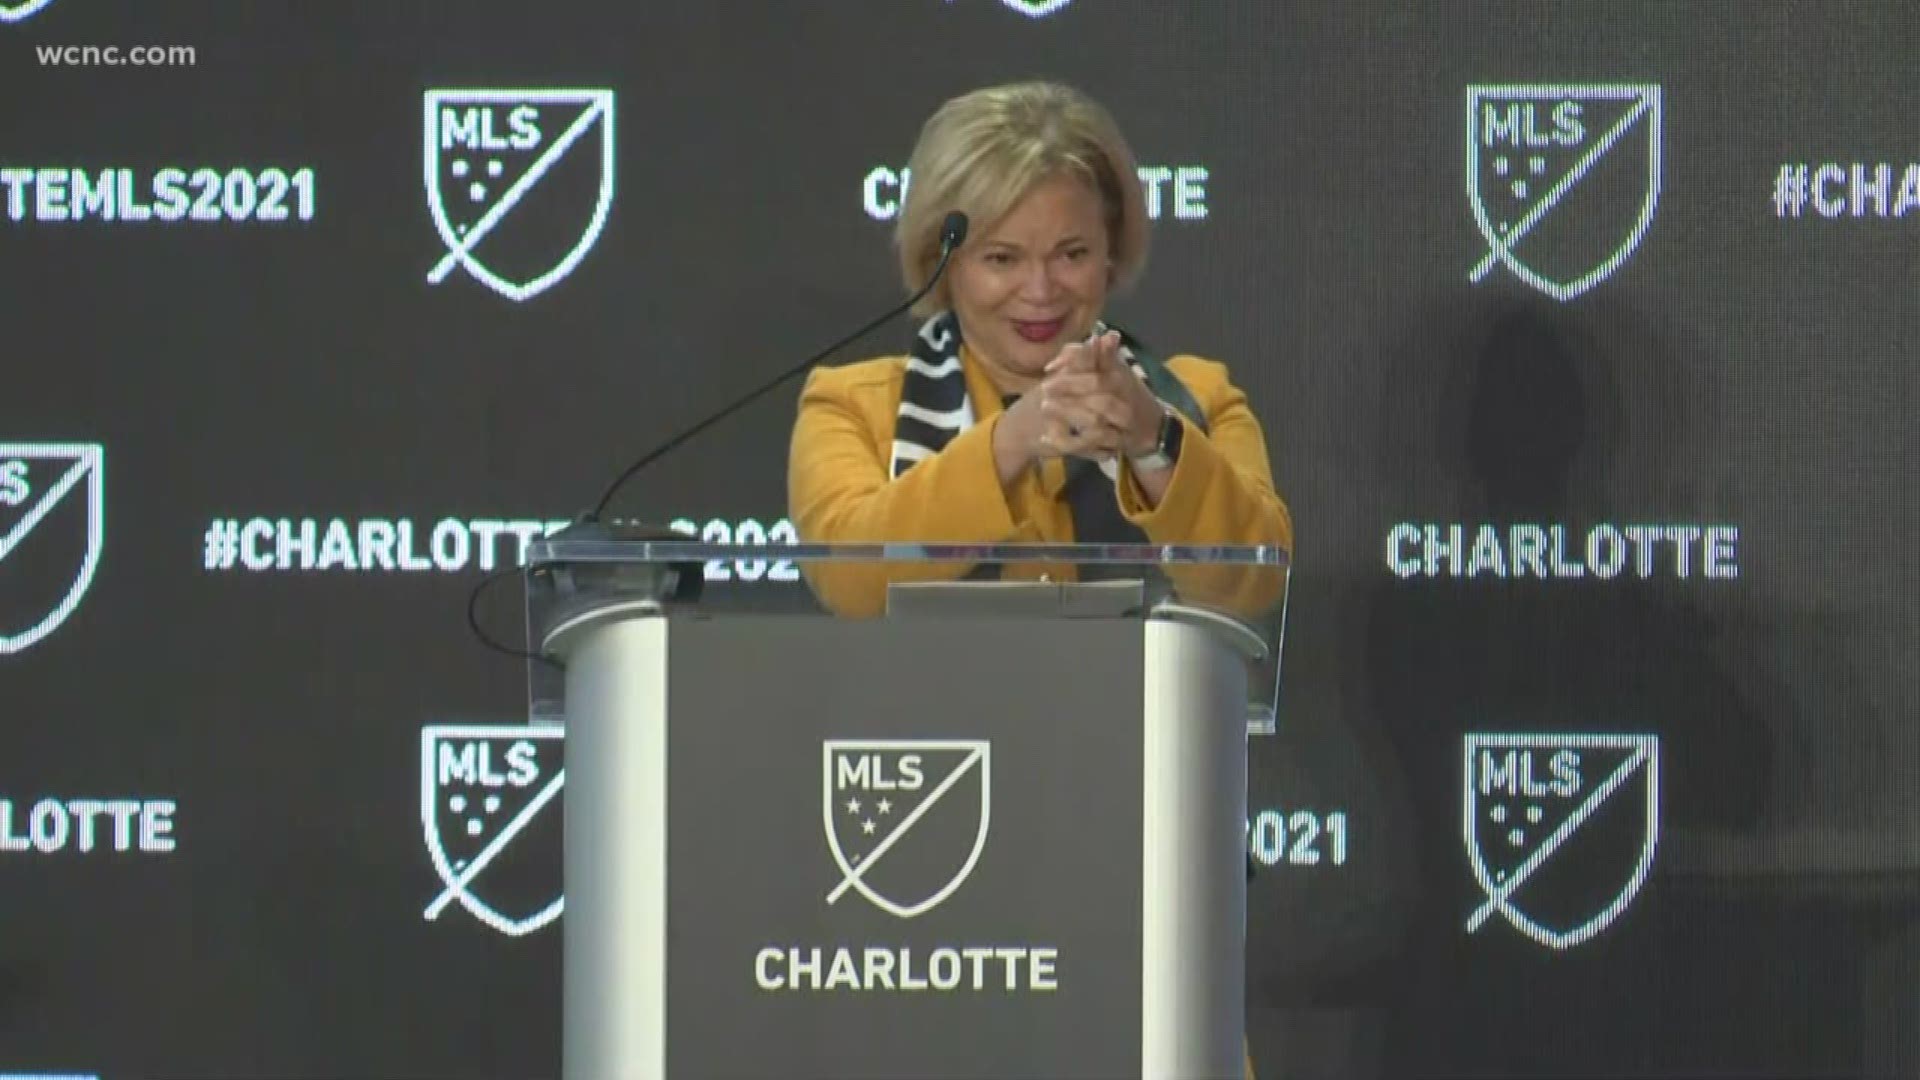 During the press conference formally announcing the Charlotte MLS franchise, Mayor Vi Lyles touted the city's sports heritage.